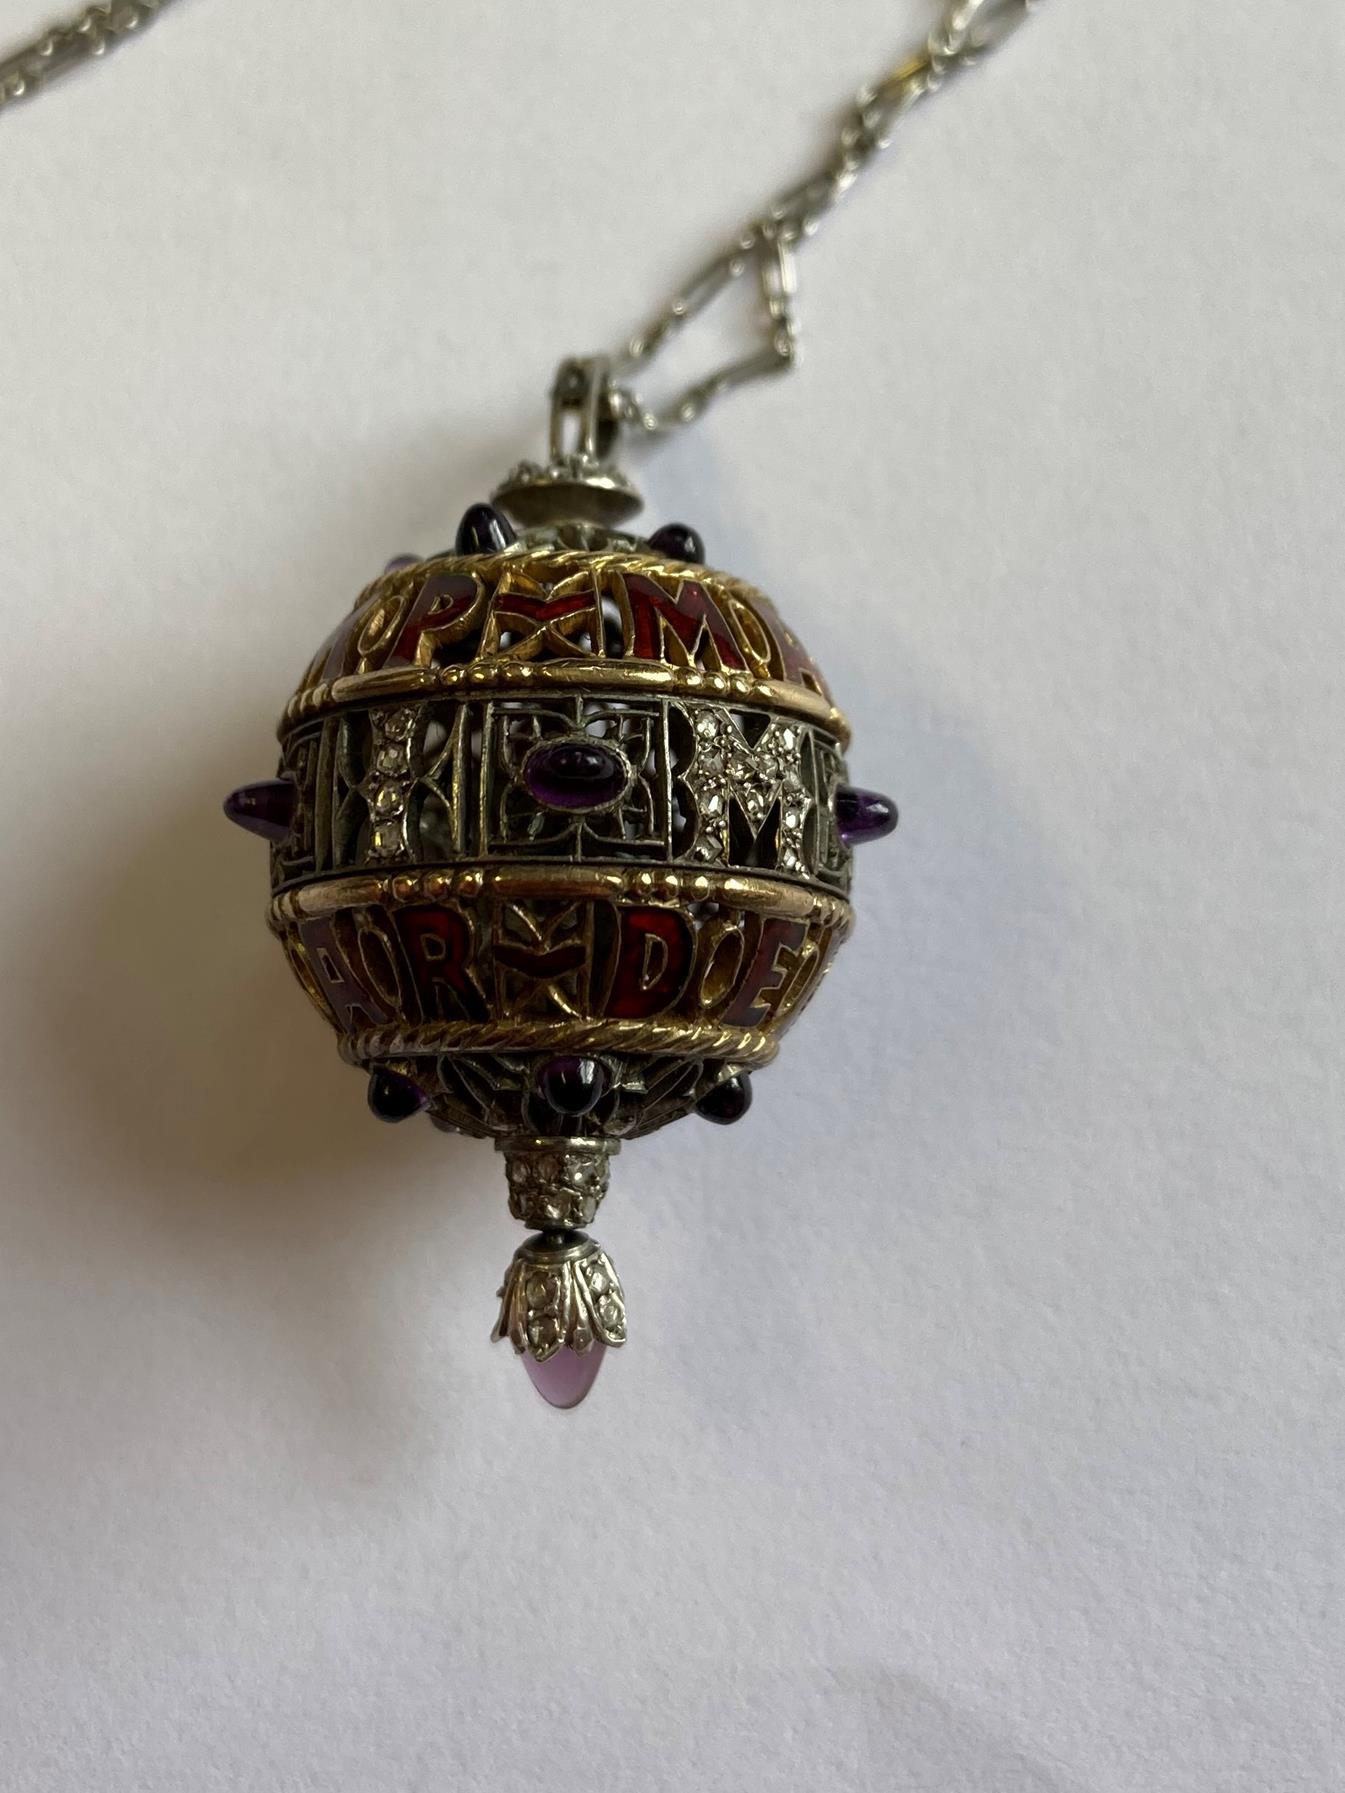 An Amethyst, Diamond and Enamel Pendant on Chain, 1911, the openwork ball with red enamel - Image 6 of 8